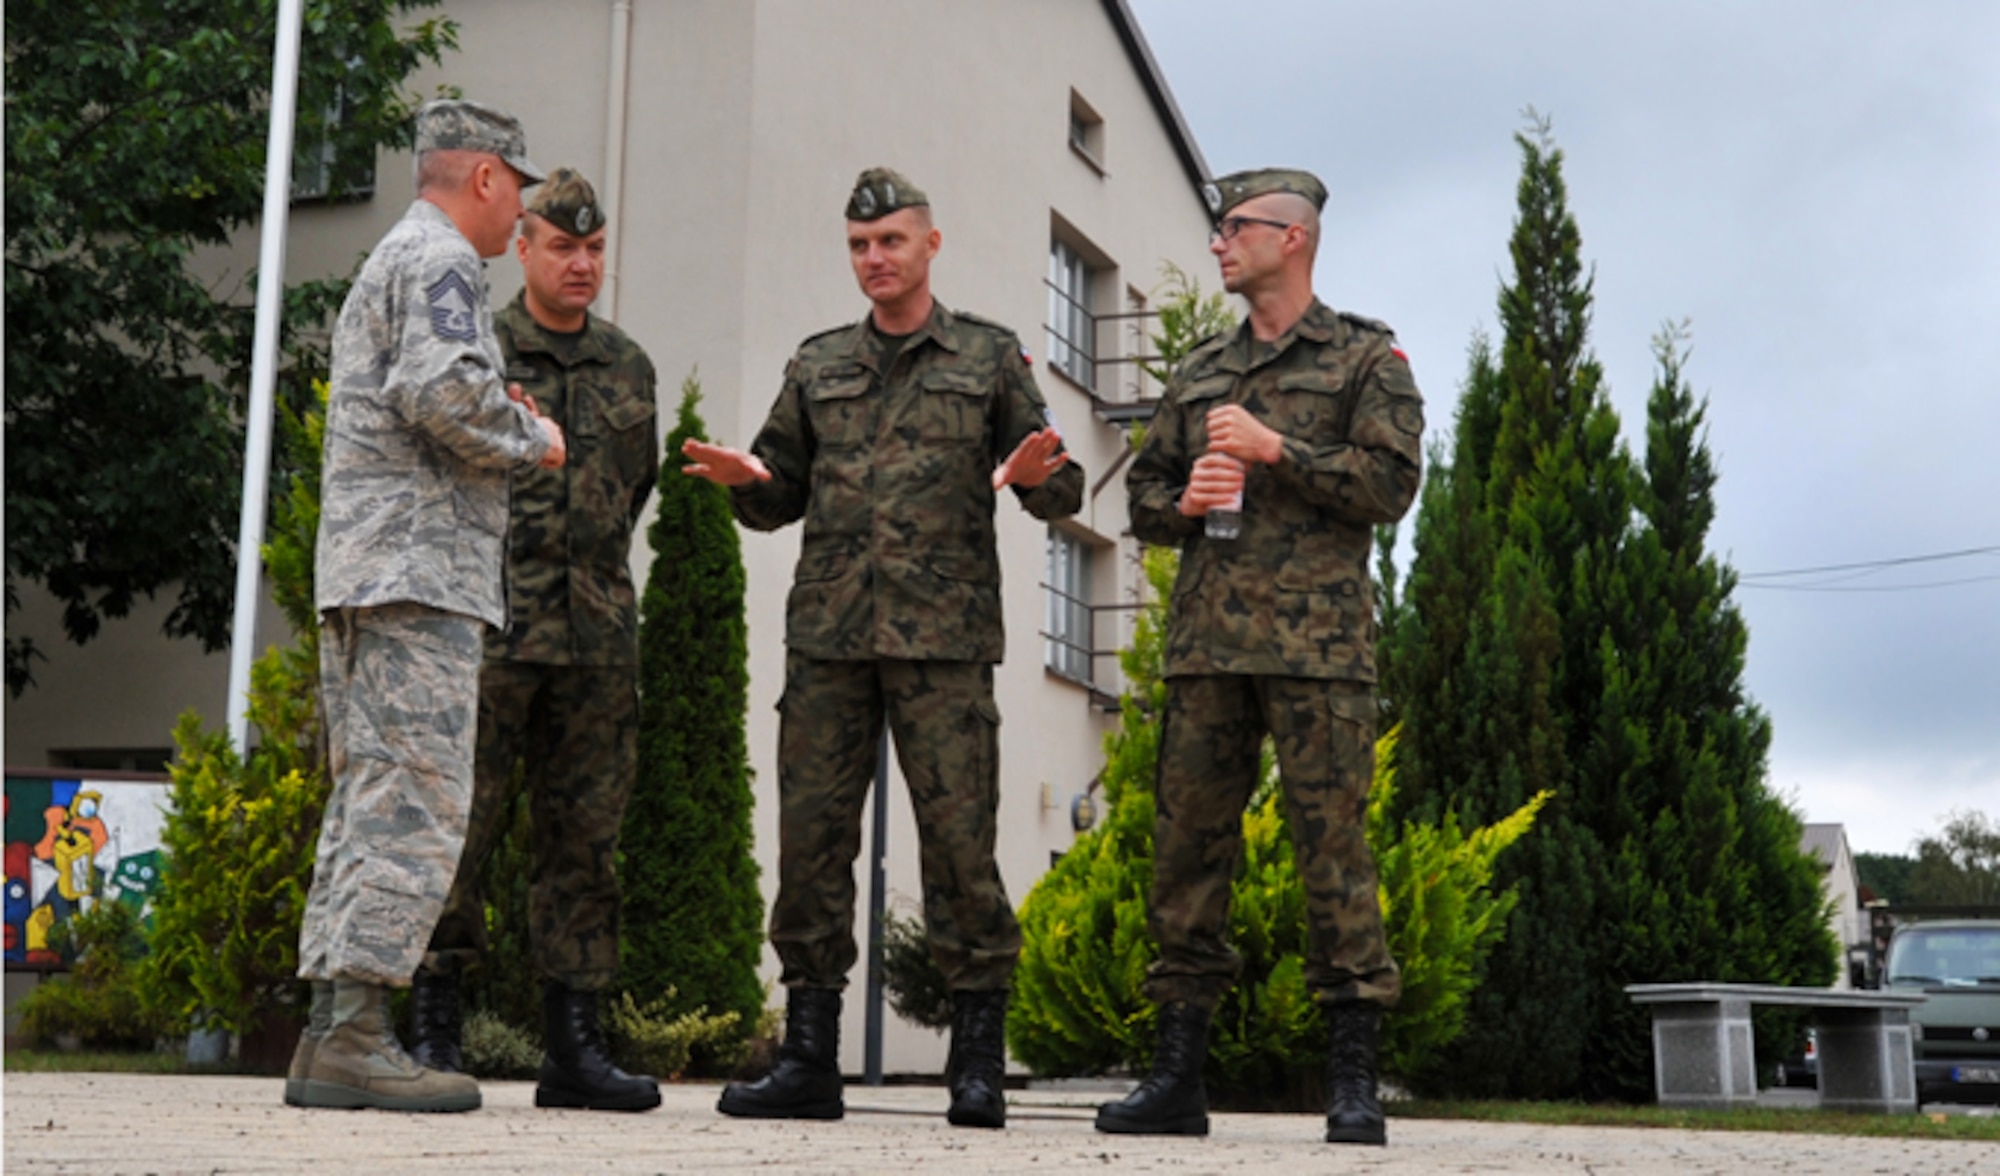 Chief Master Sgt. Christopher Moore (far left), Kisling NCO Academy commandant, gives a tour to Warrant Officer 1st Class Krzysztof Gadowski (second from right) and his staff Sept. 17, 2013, at Kapaun Air Station, Germany. The visit gave the Polish senior NCO leaders a chance to further military relations and improve military education programs for Polish airmen.